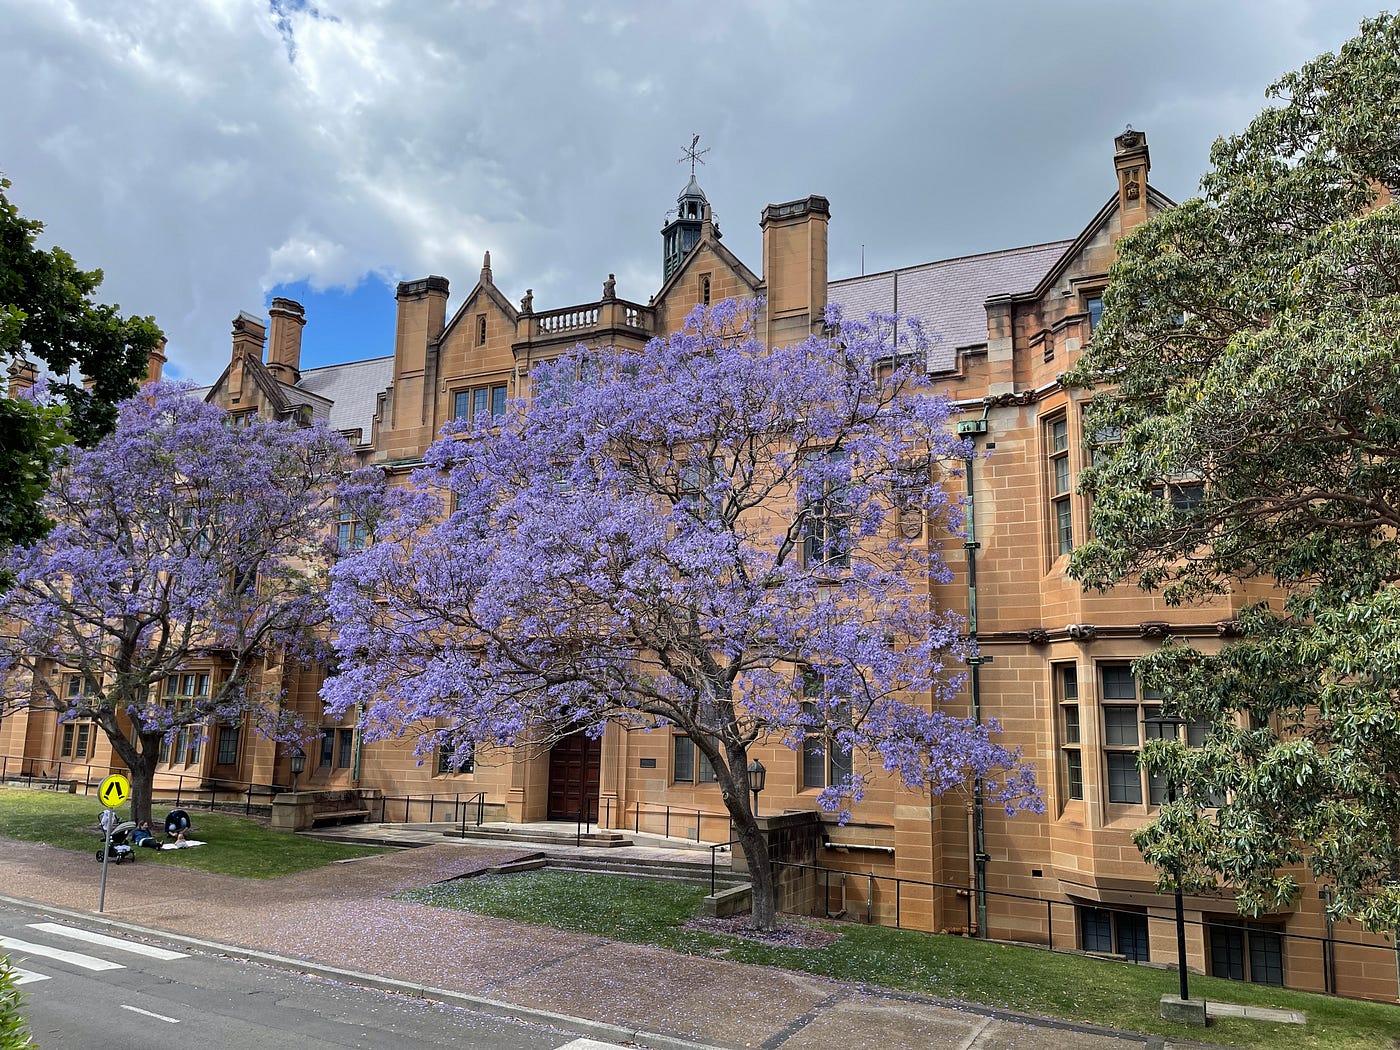 A university sandstone building in Australia is in the background. Trees flowering in purple perch in front of the regal building.